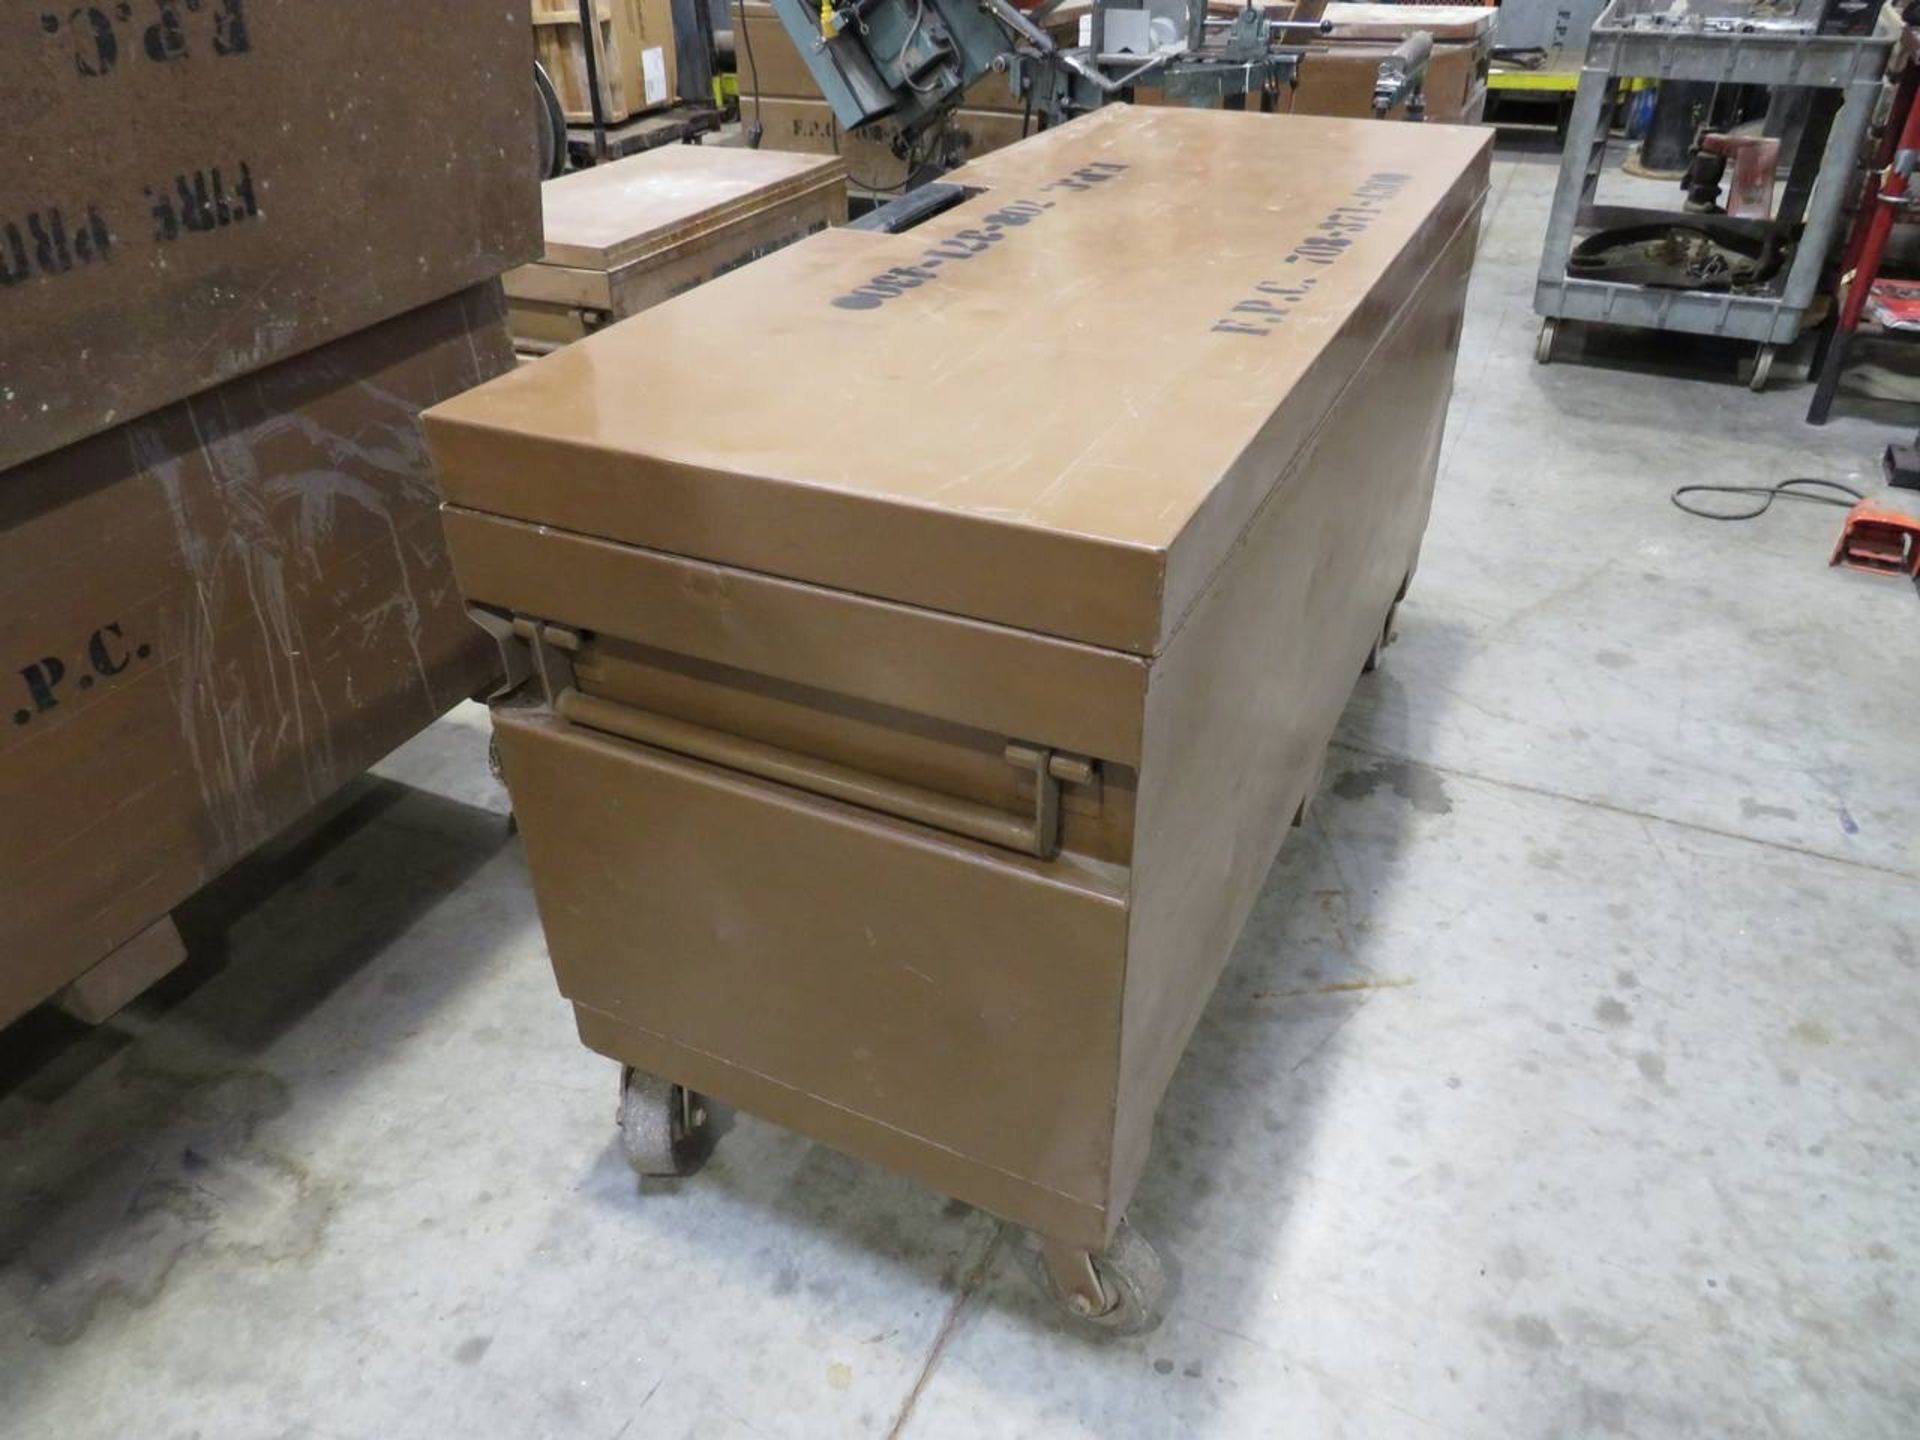 Knaack 60 Job Master 20.25 Cu. Ft. Approx. 60" W x 24" D x 36" H Storage Chest - Image 9 of 9